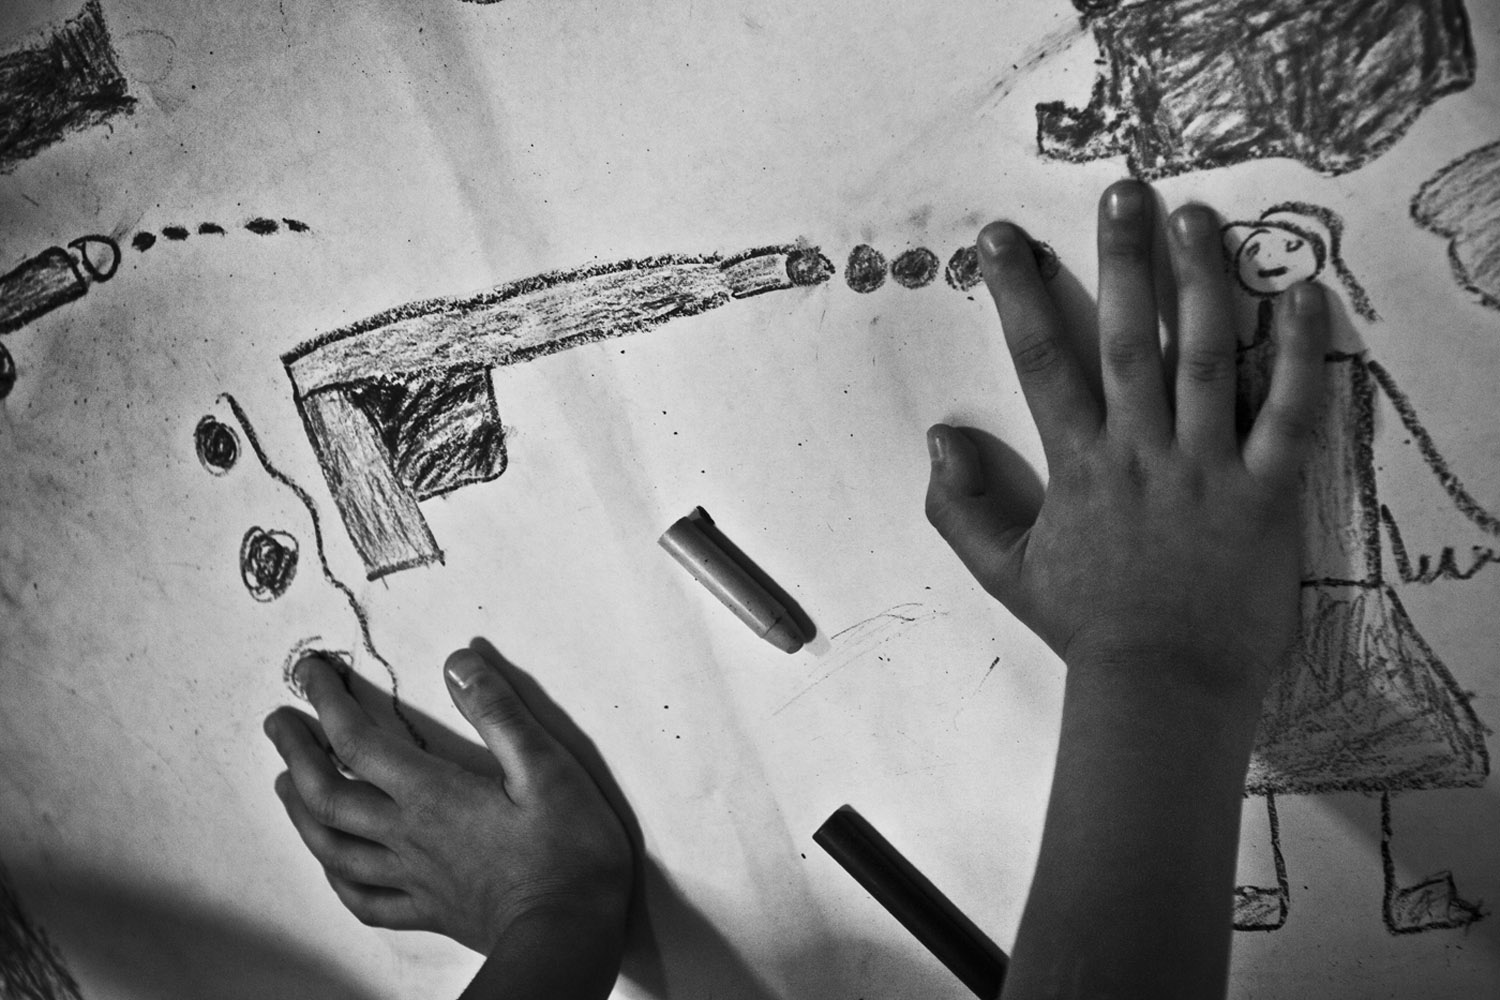 image: A child draws daily scenes of violence in his community. The age of entry into crime life is dropping and there are an increasing number of cases involving boys as young as 10 or 11 years old.